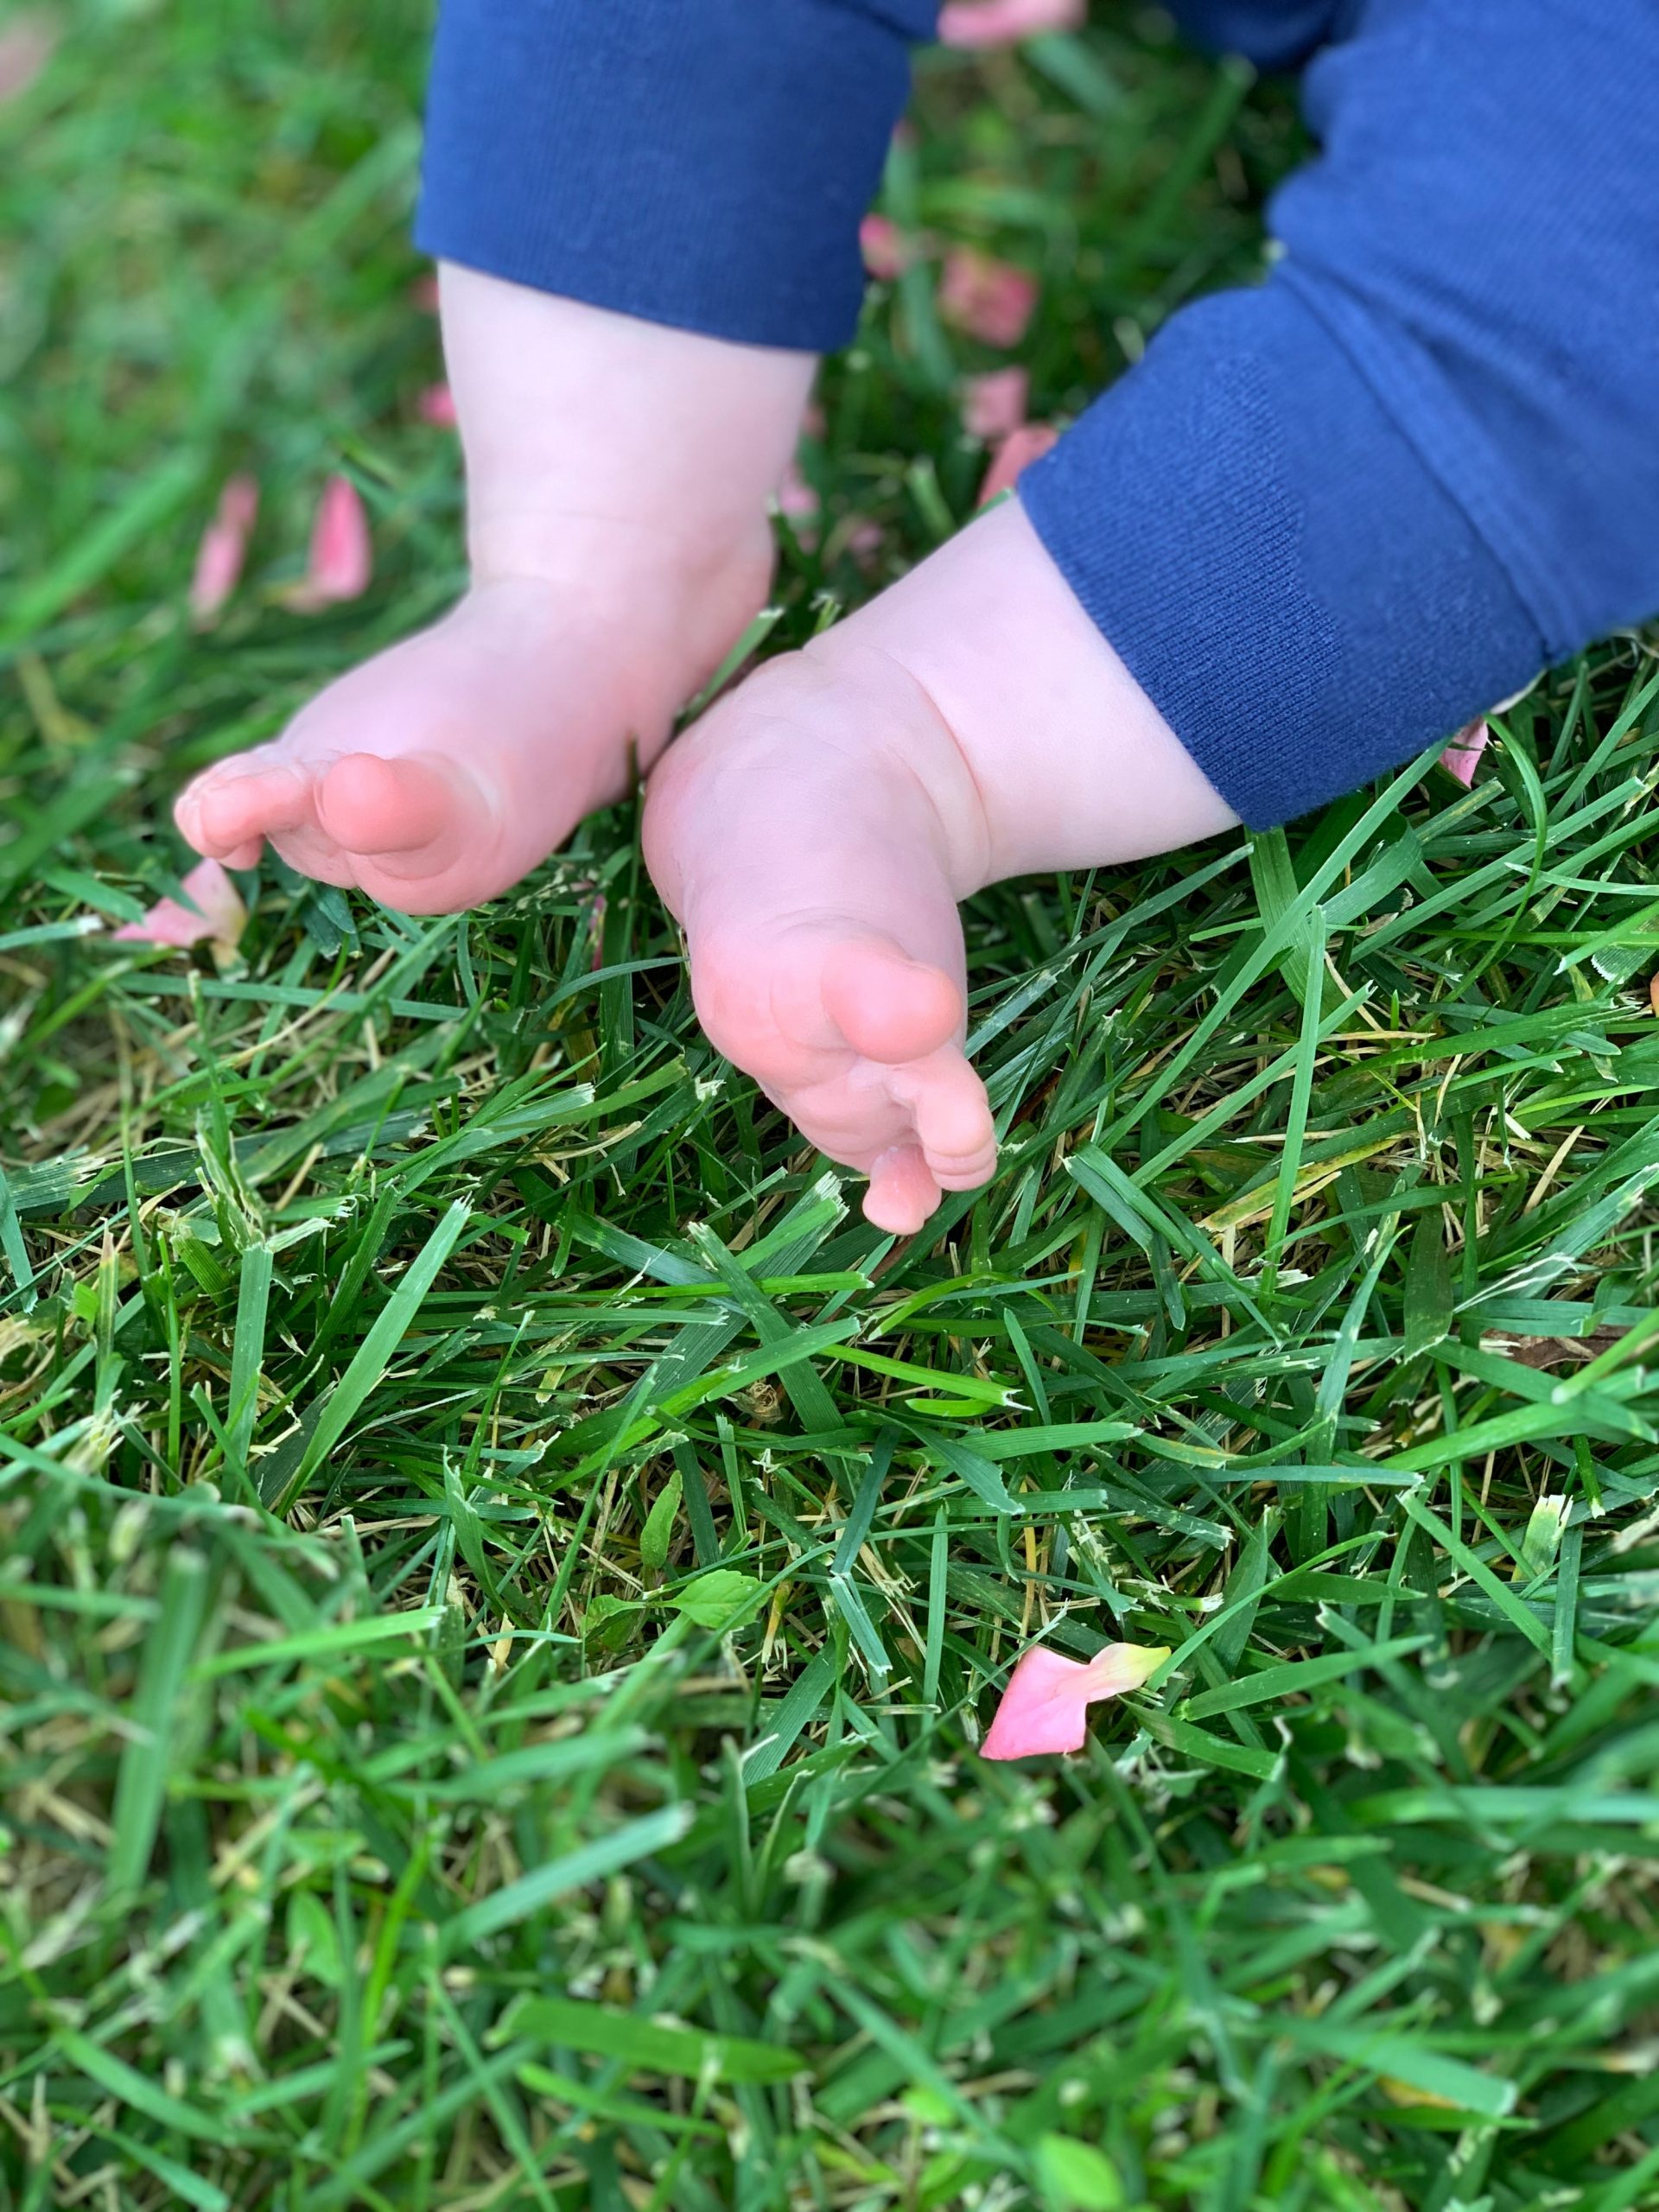 Baby's feet in the grass